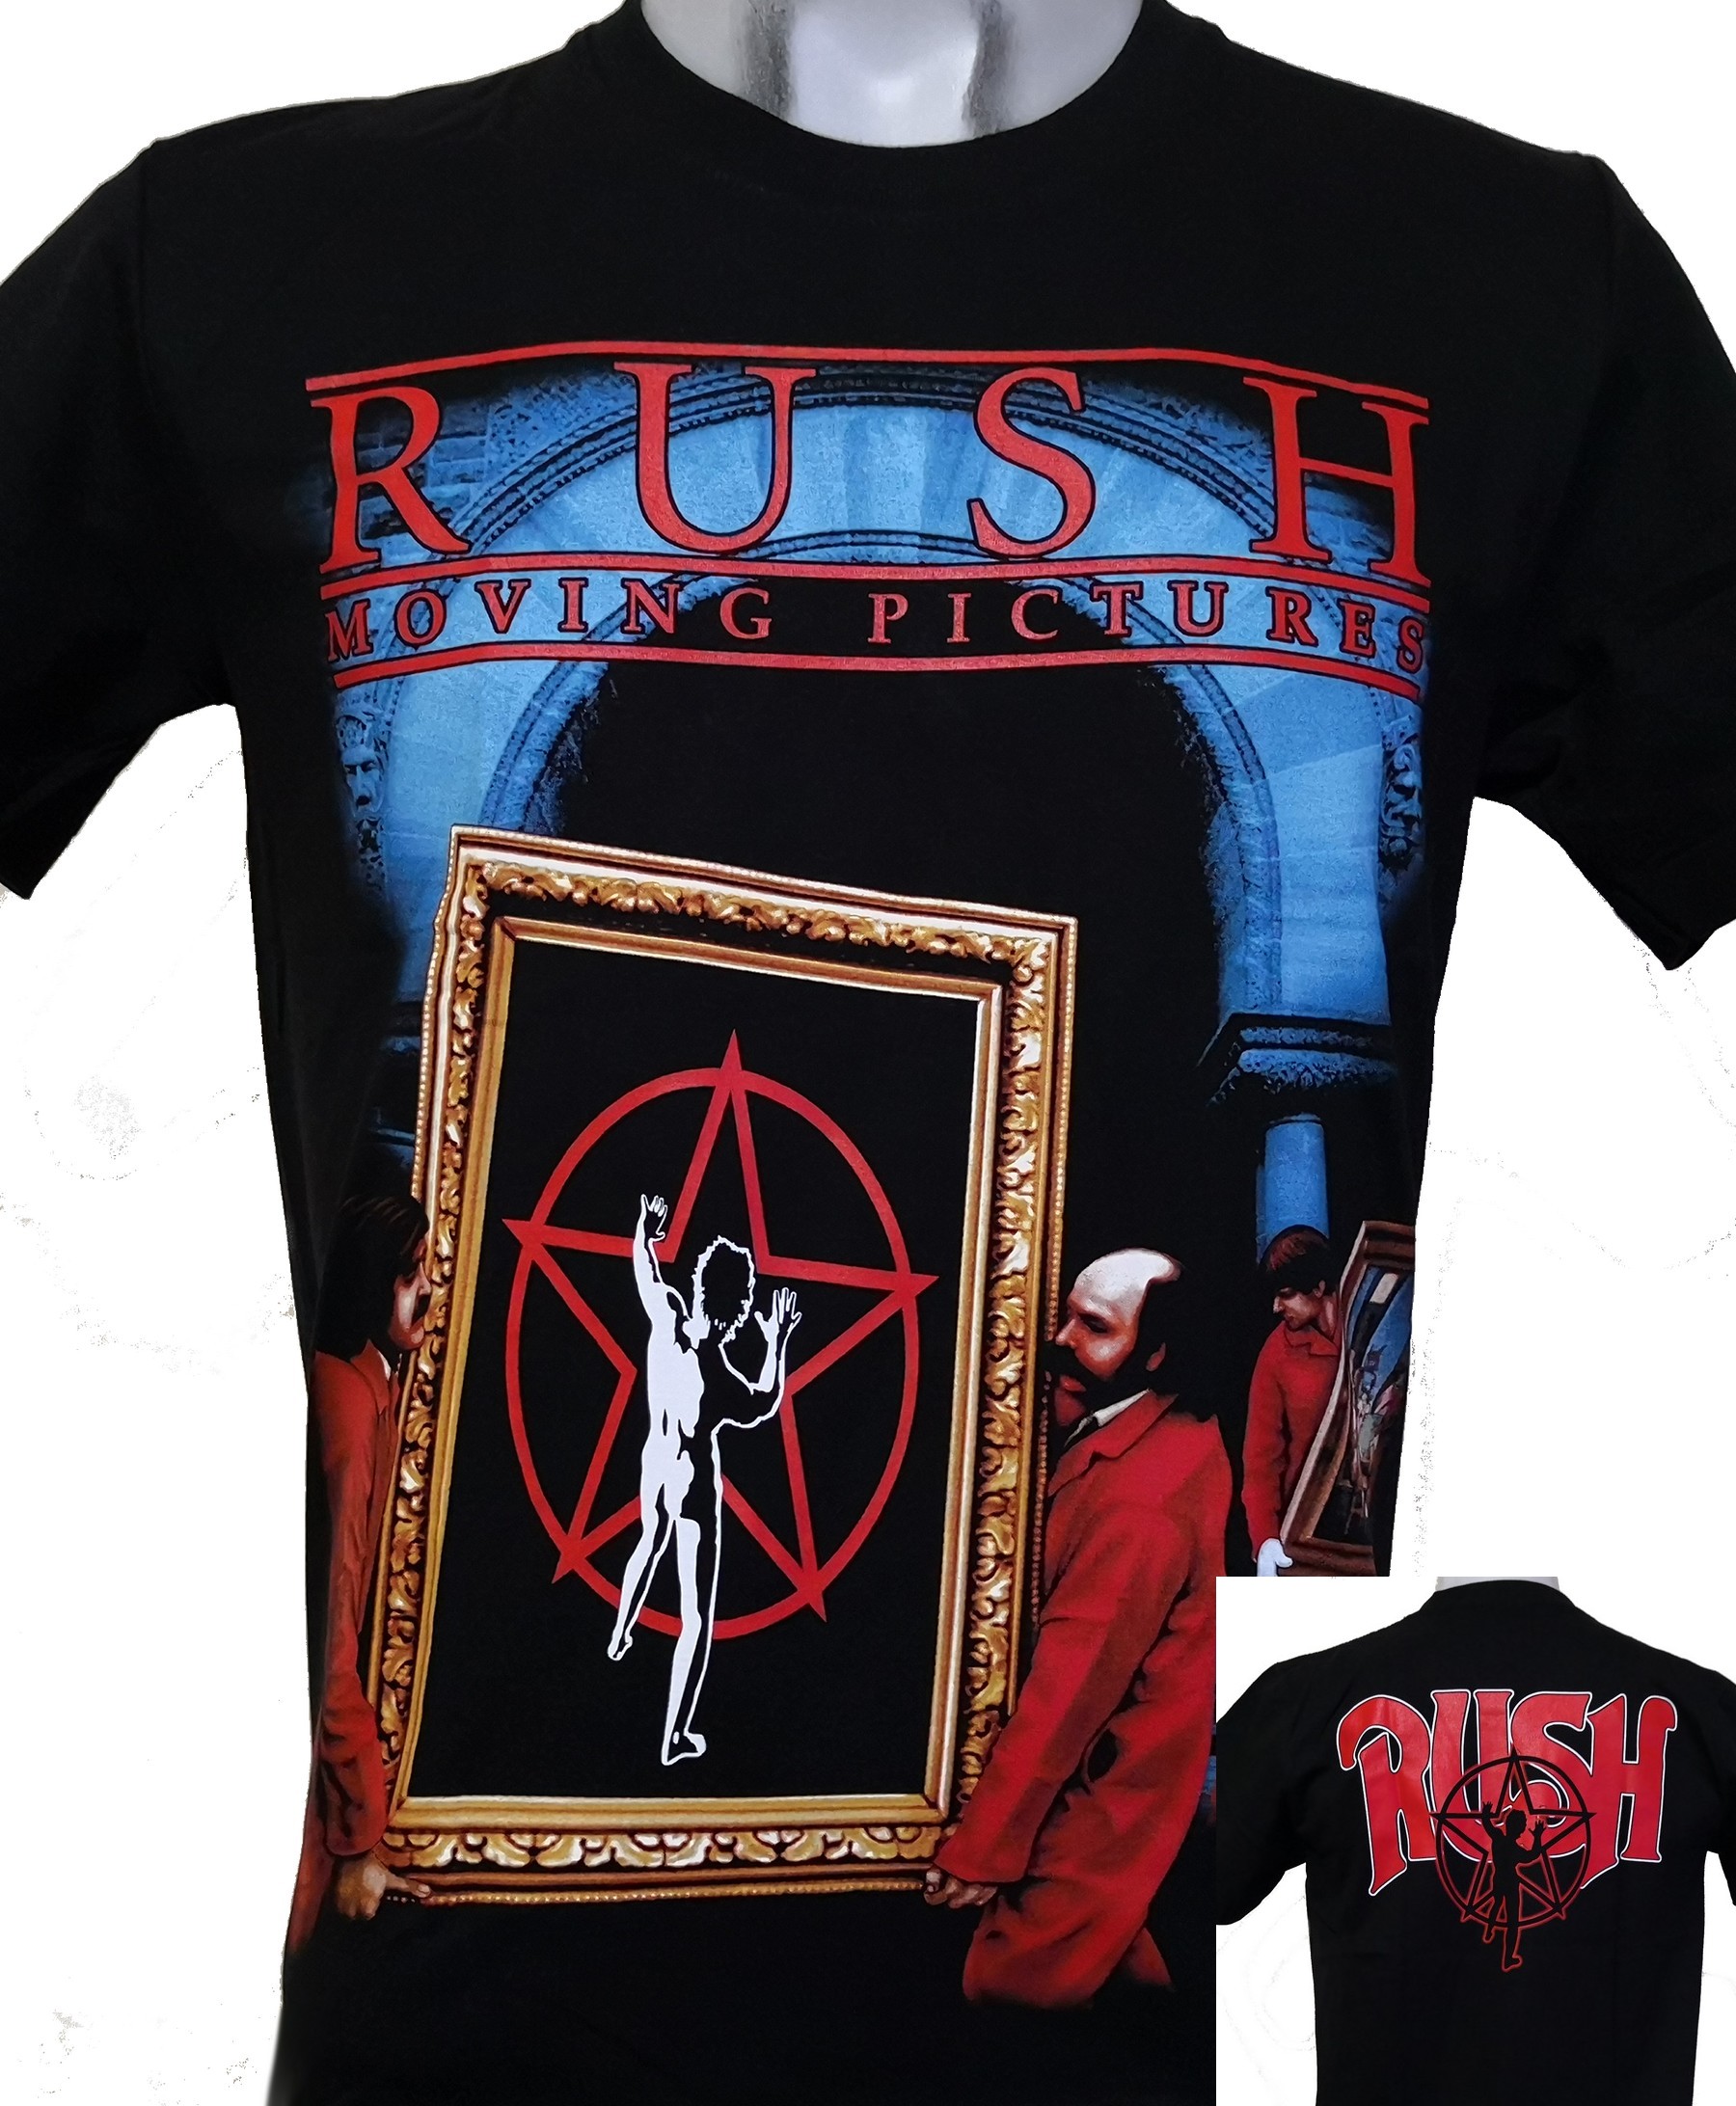 Gedrag Melodieus groef Rush t-shirt Moving Pictures size L – RoxxBKK